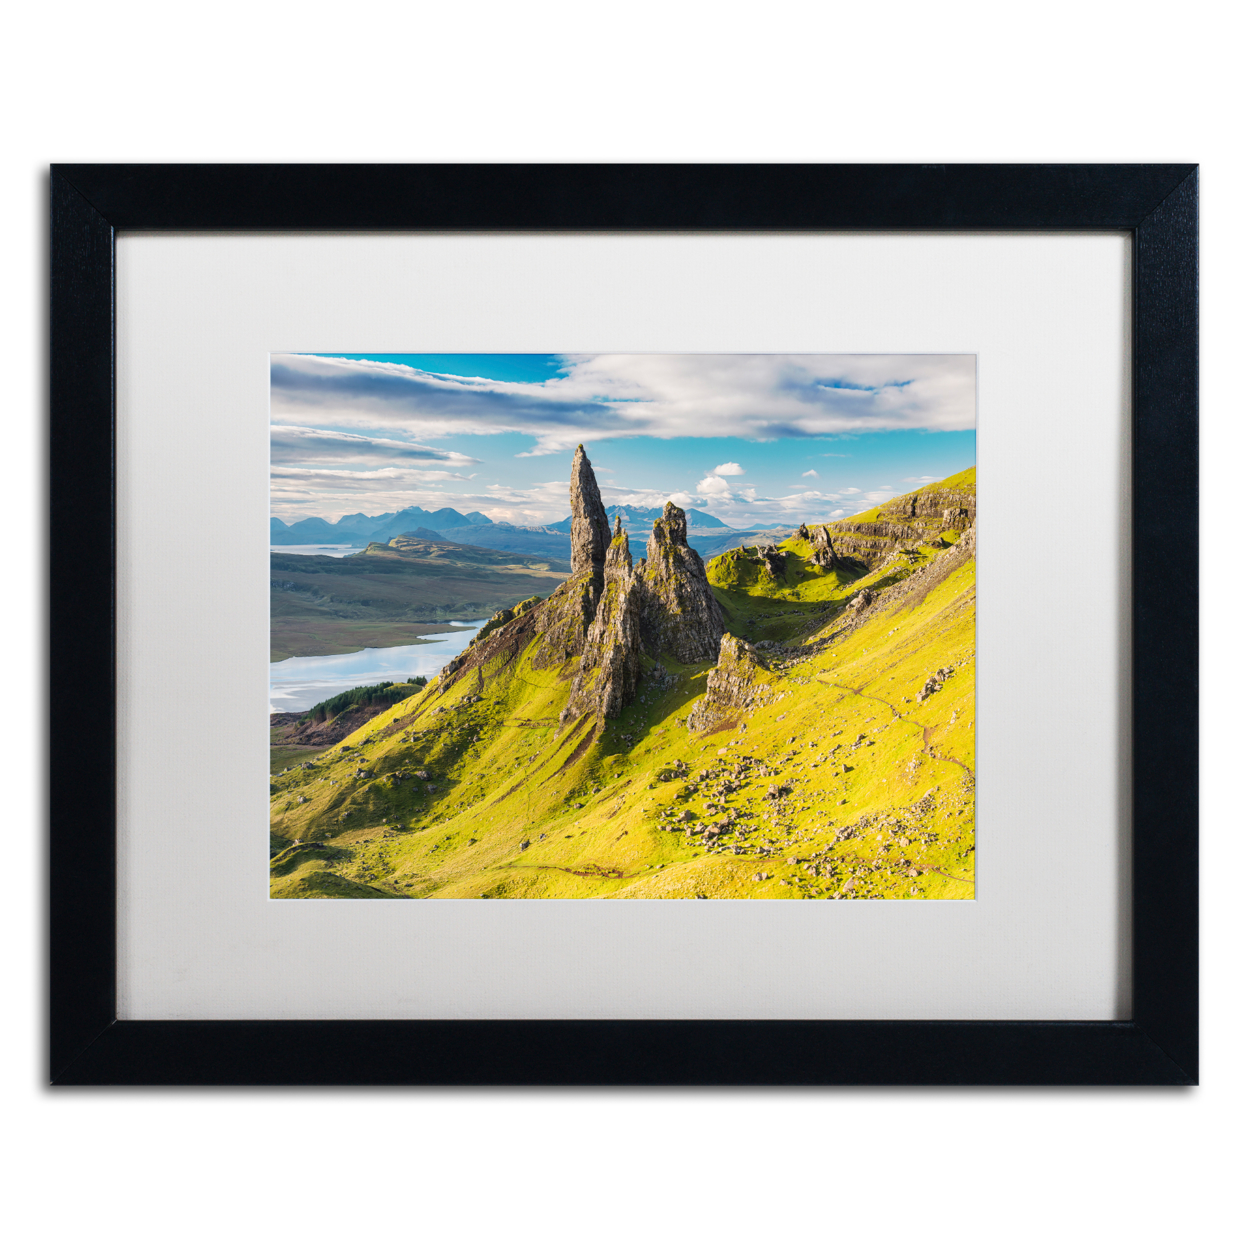 Michael Blanchette Photography 'Sanctuary Pinnacles' Black Wooden Framed Art 18 X 22 Inches